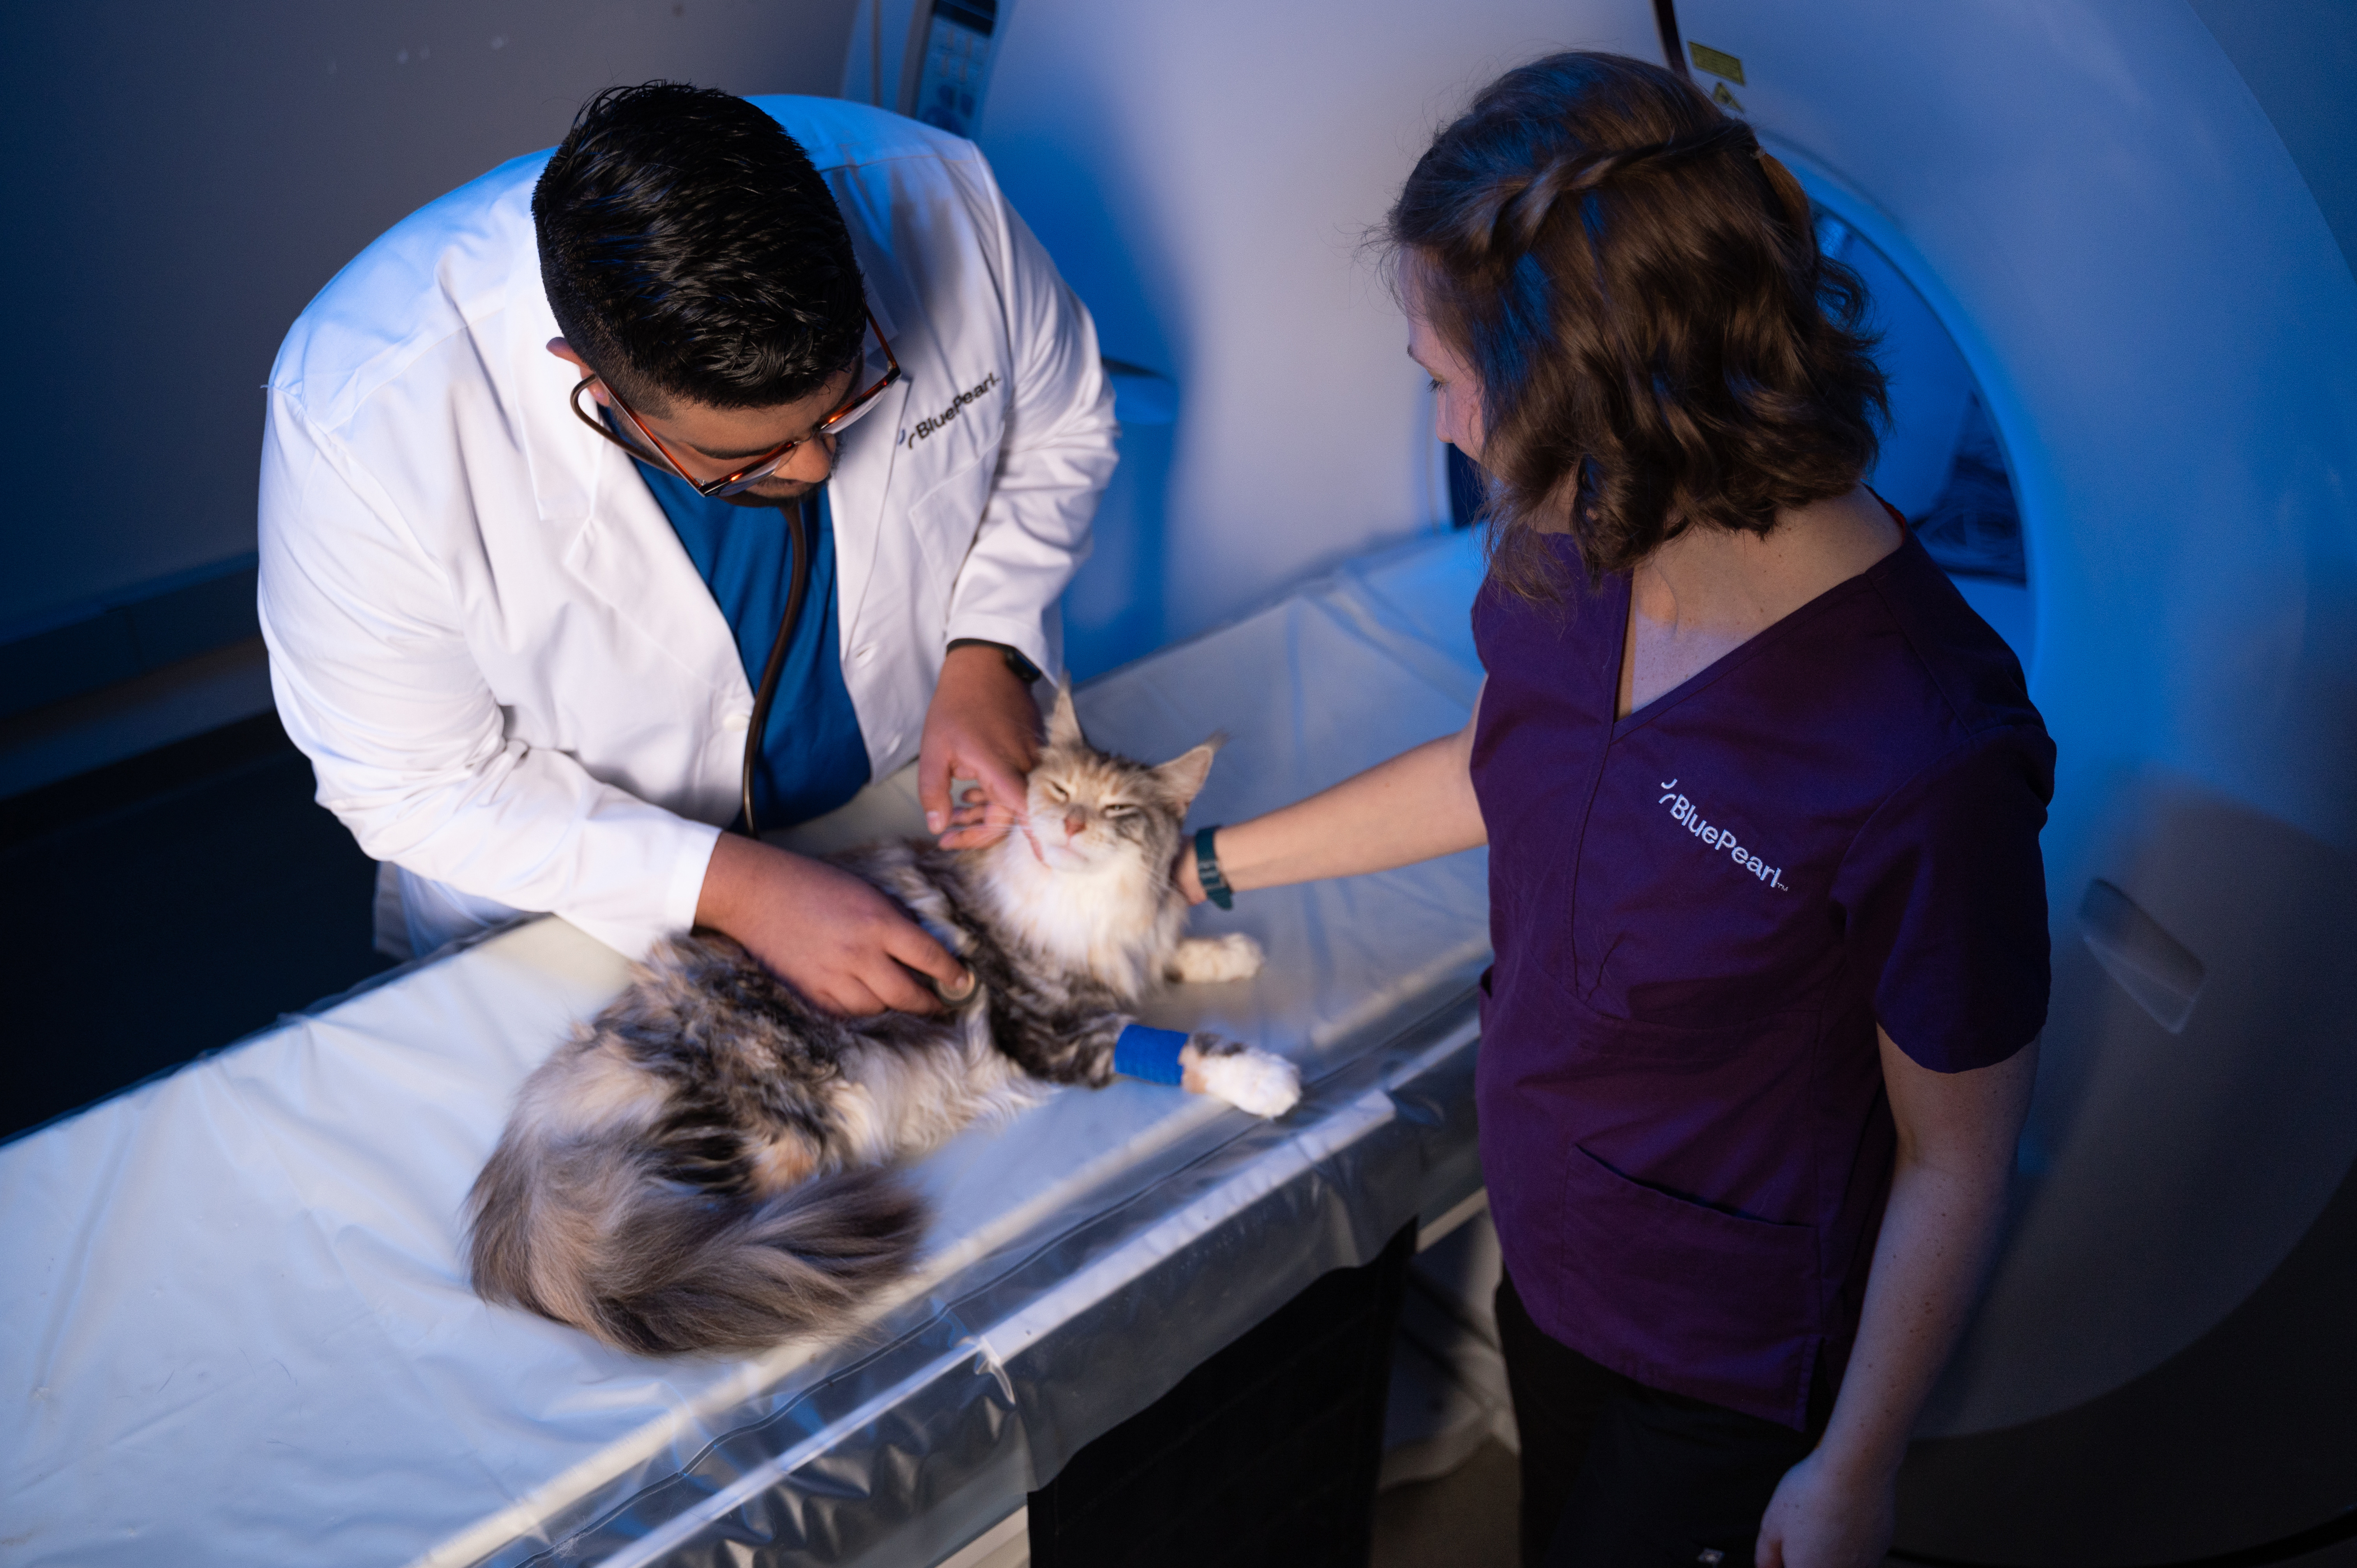 A veterinarian and a technician comfort a patient while they prepare them for imaging.